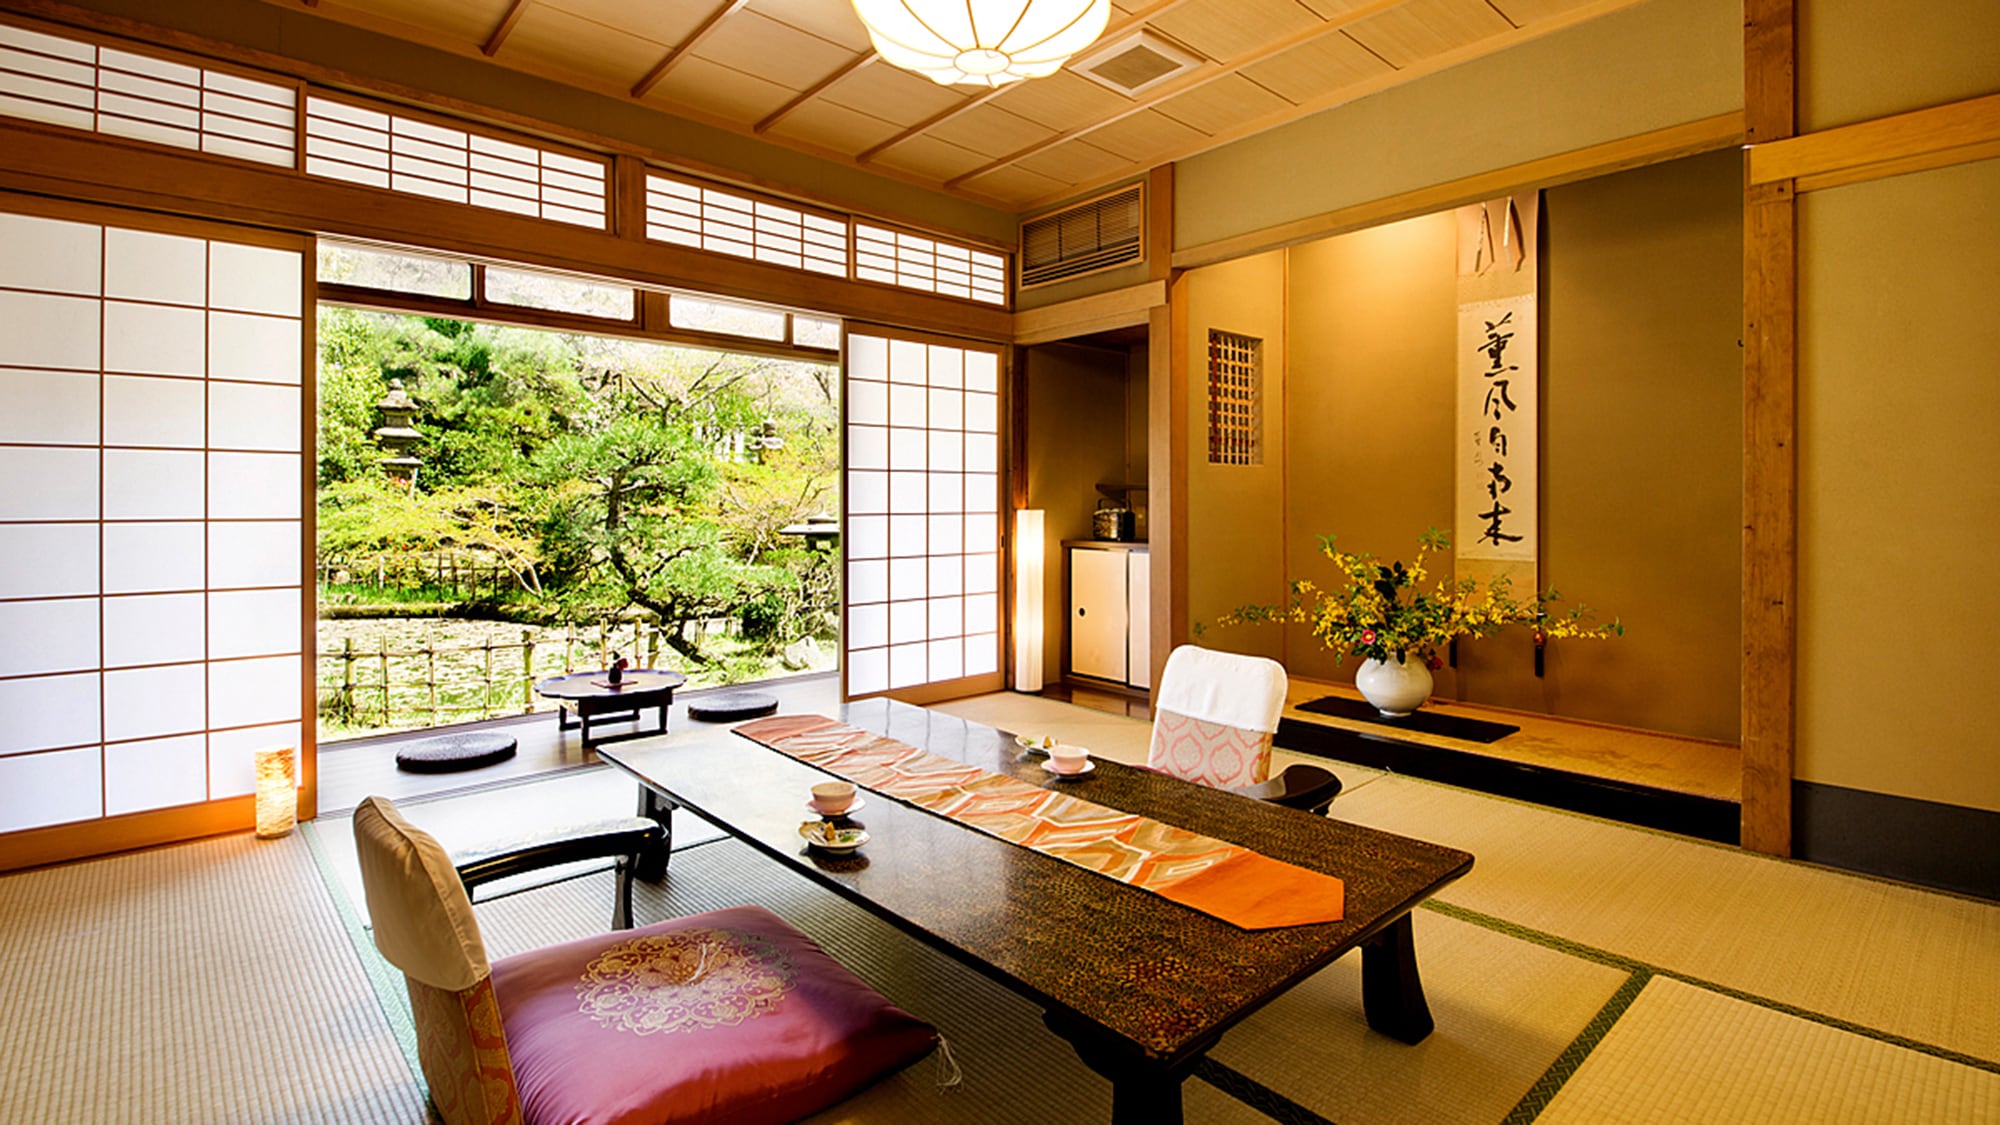 [Tsuruma-TSURU-] & ldquo; Graceful and quiet & rdquo; Guest room with a beautiful view of nature